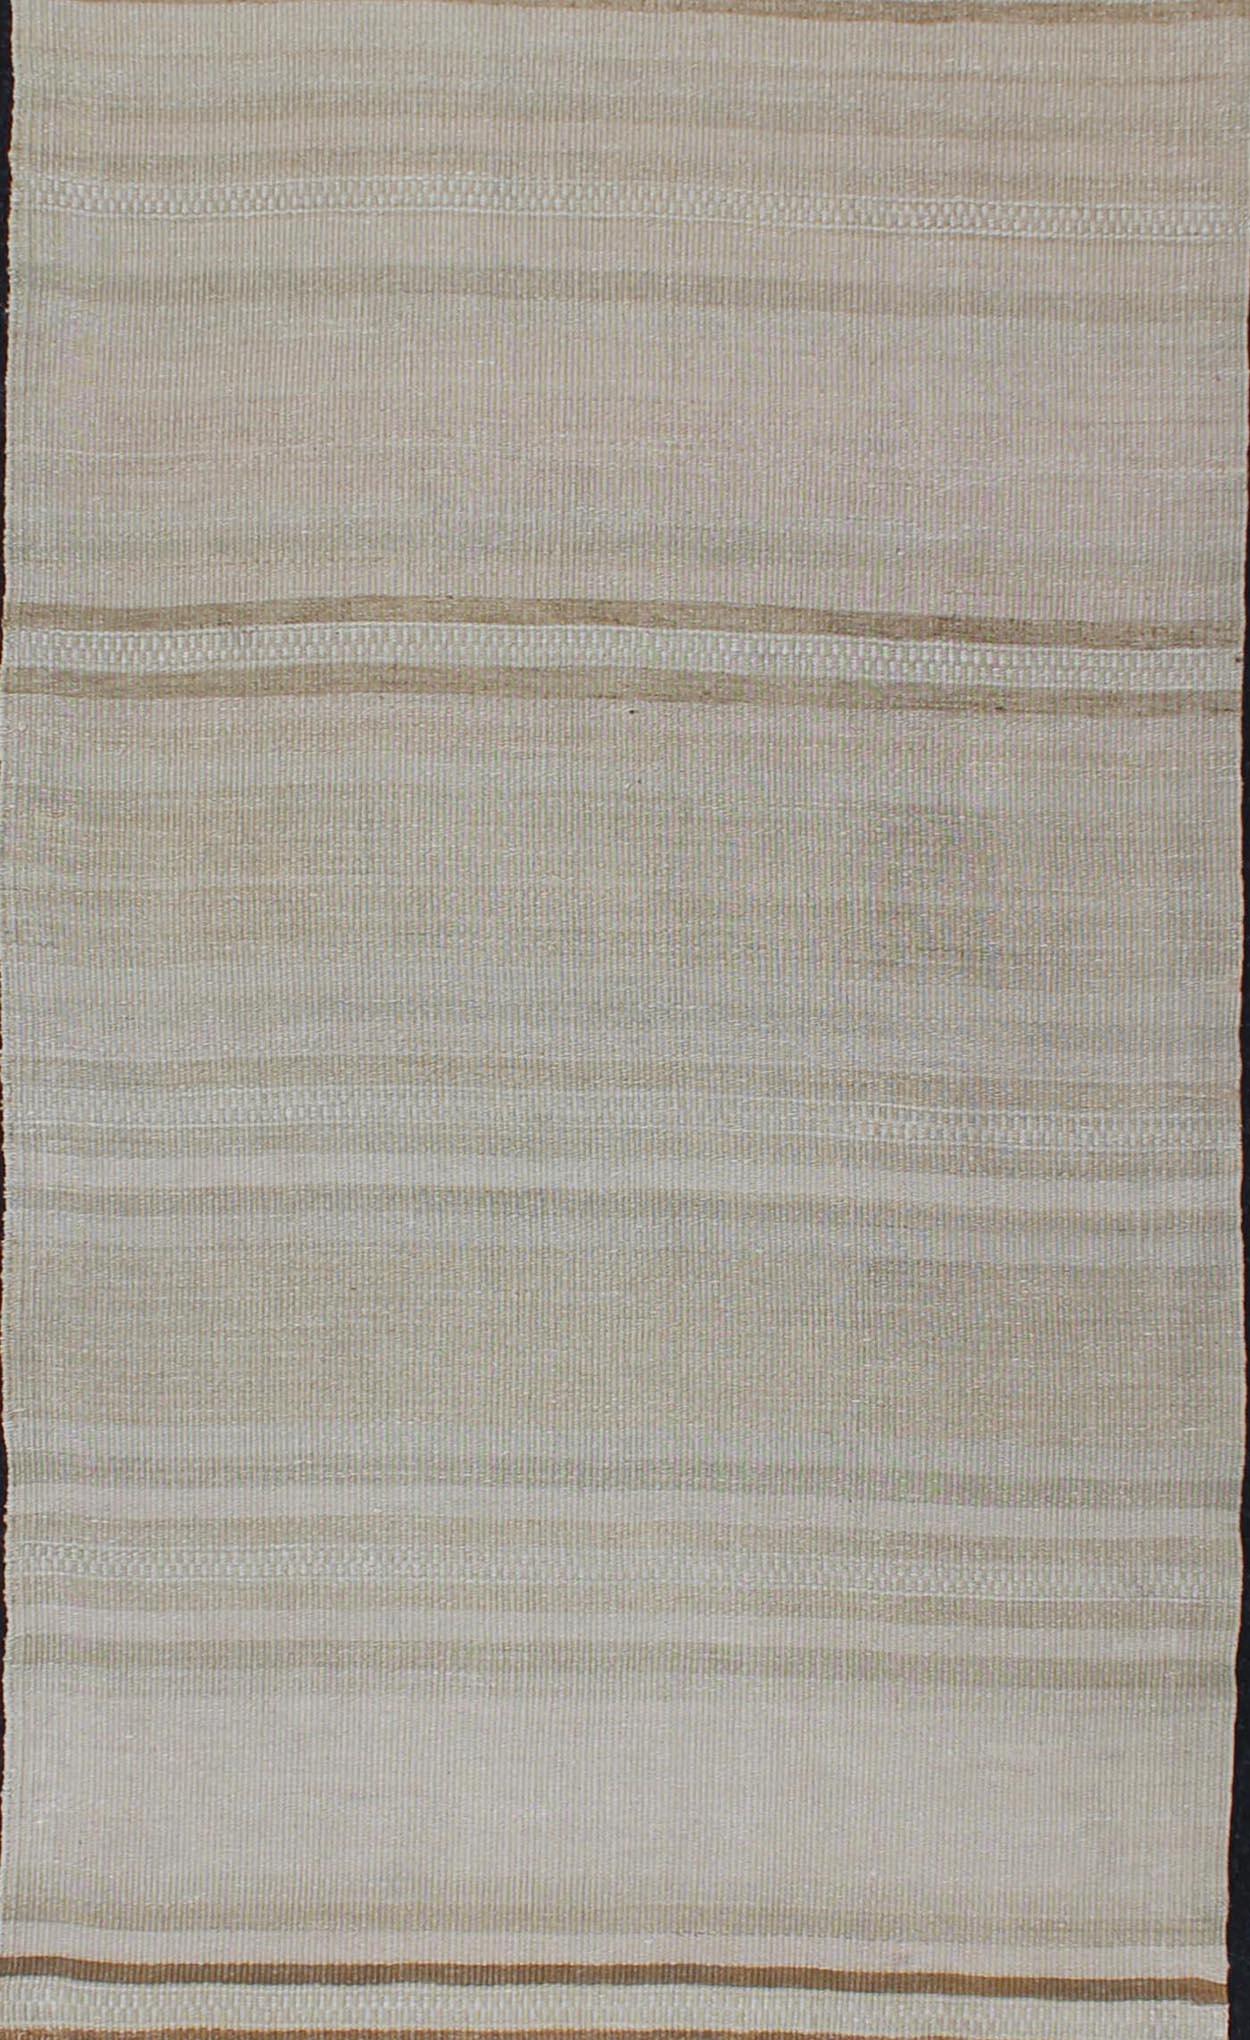 Vintage Turkish Kilim Runner with Stripes in Light Brown and Neutral Tones In Good Condition For Sale In Atlanta, GA